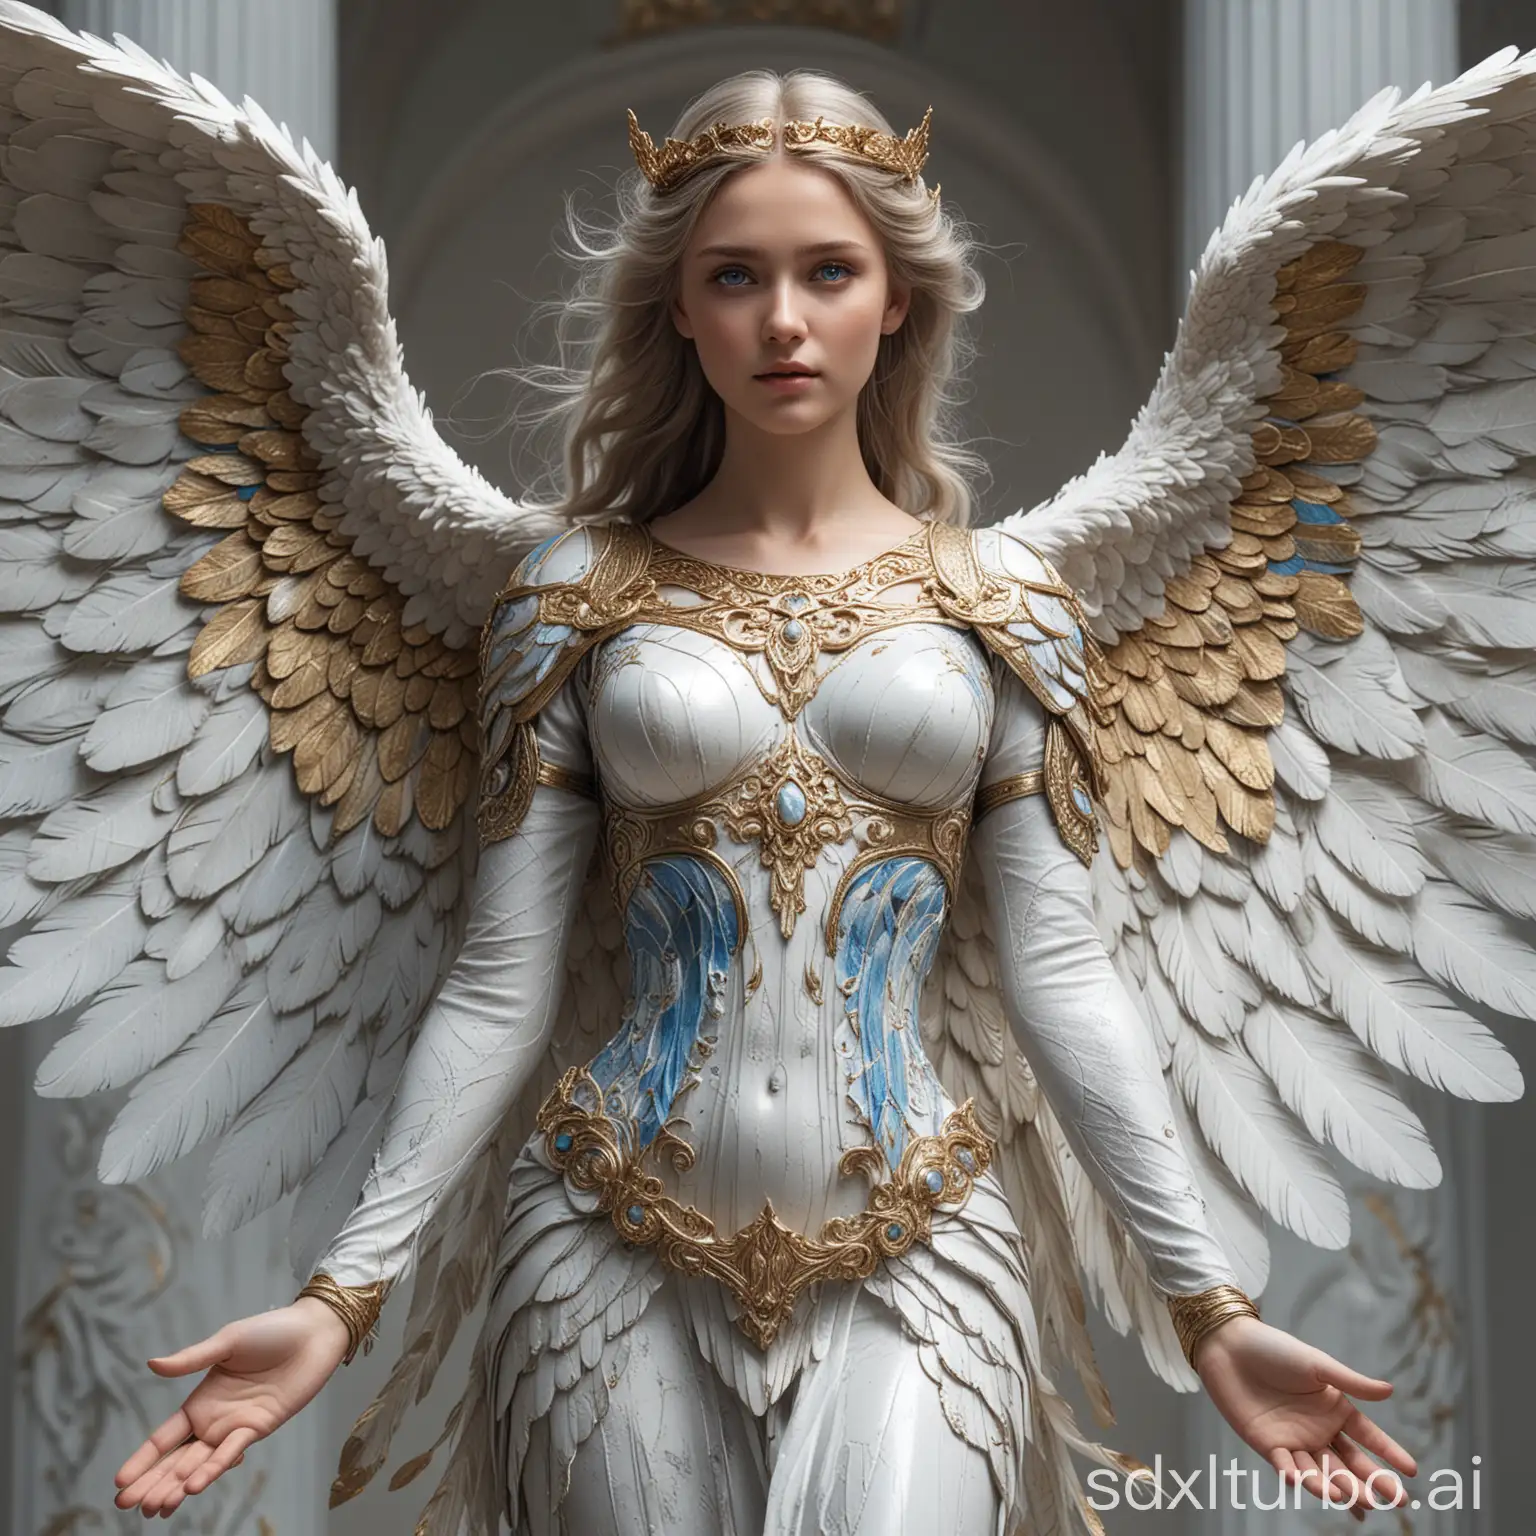 RAW Photo of detailed magnificent detailed angel with wings  in a full-body ultra wide shot  from a adistance that full body and wings are visible, with sharp focus , clear big blue catchy eyes, detailed face and skin texture,wings outstretched with gold & silver  tips on feathers, intricate ornate marble, and bone interwoven and spiraling patterns, final fantasy style,super beautiful ggoddess wearing translucent  great at both photos and artistic feathered 8k, high resolution, detailed, realistic lighting, focus on hands/face, painterly, strong composition, award-winning with simple white background